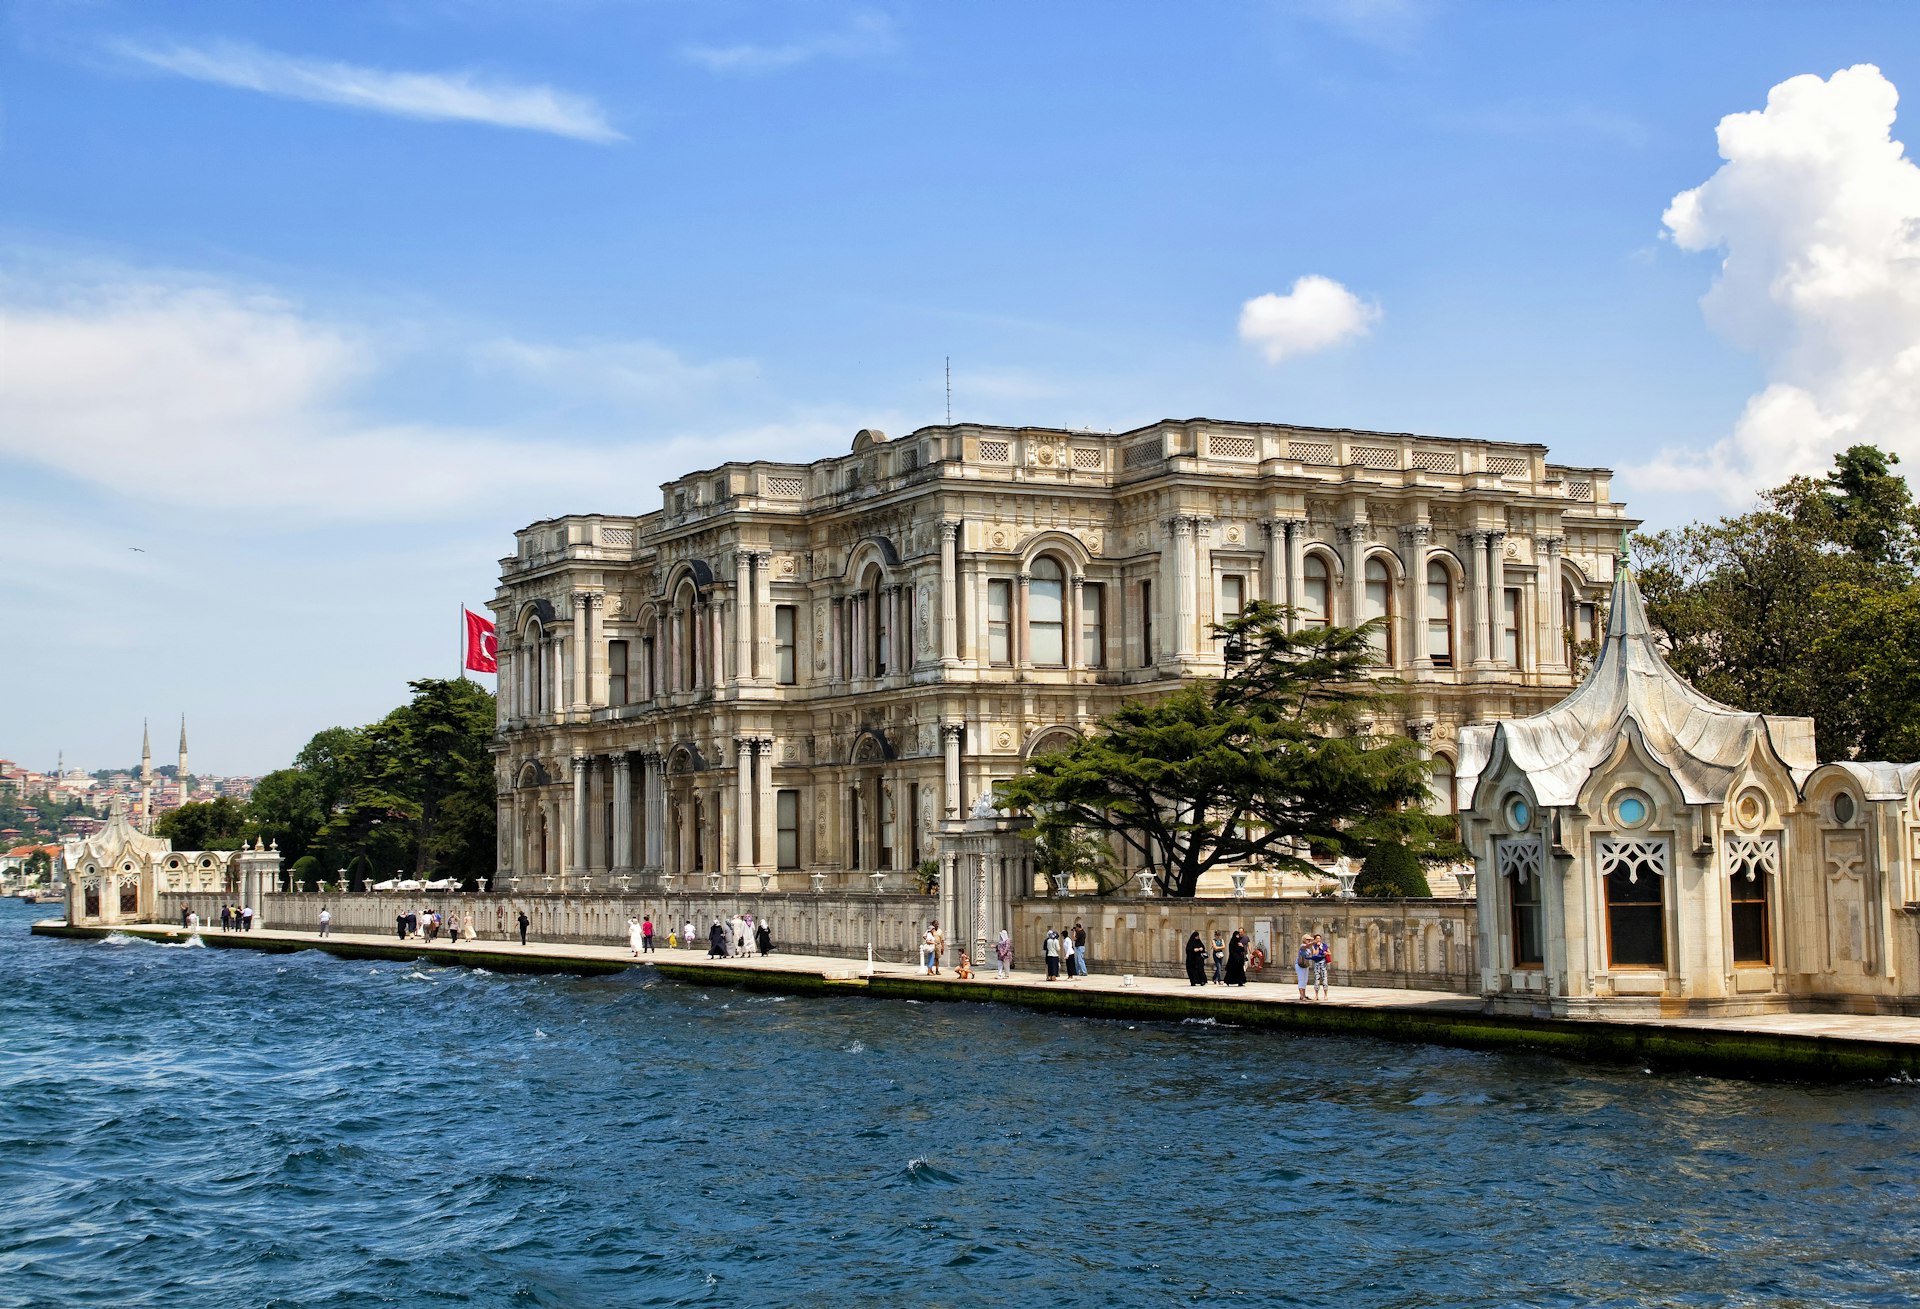 Pedestrians walking on the parade outside a Palace on the Bosporus shores in Istanbul